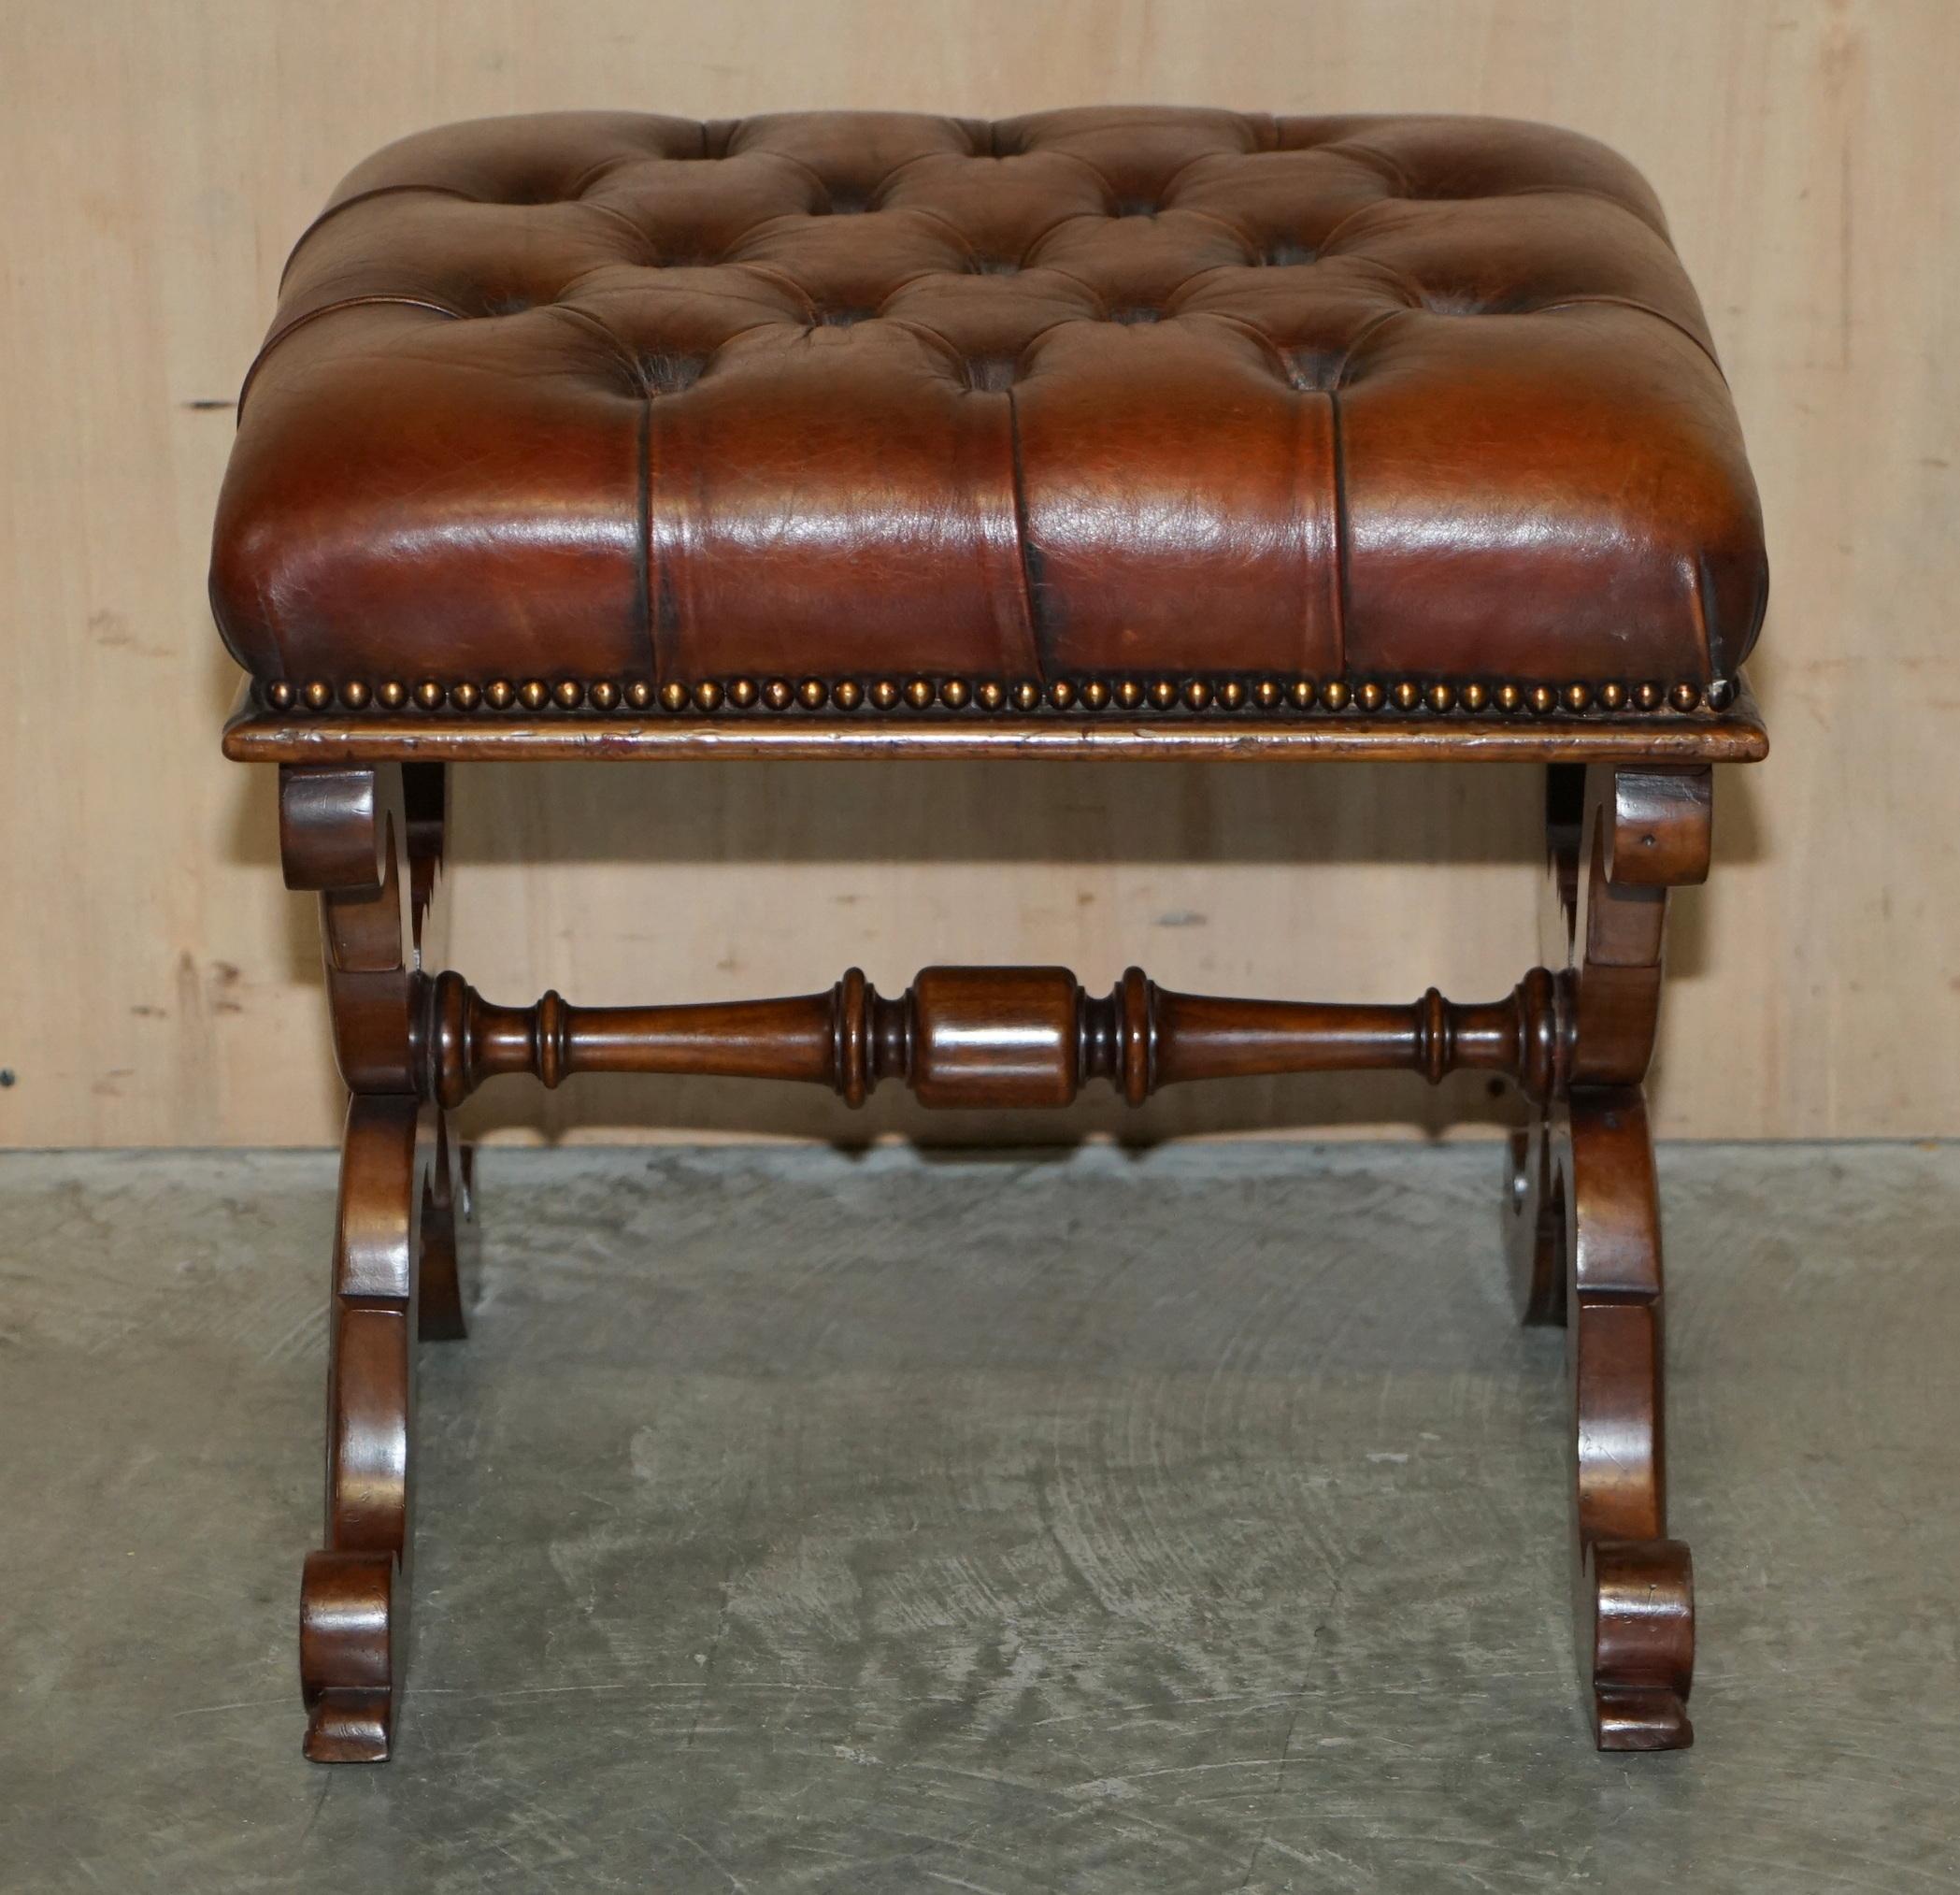 Royal House Antiques

Royal House Antiques is delighted to offer for sale this exquisite original Victorian hand dyed Chesterfield brown leather footstool with ornately hand carved Mahogany frame

Please note the delivery fee listed is just a guide,